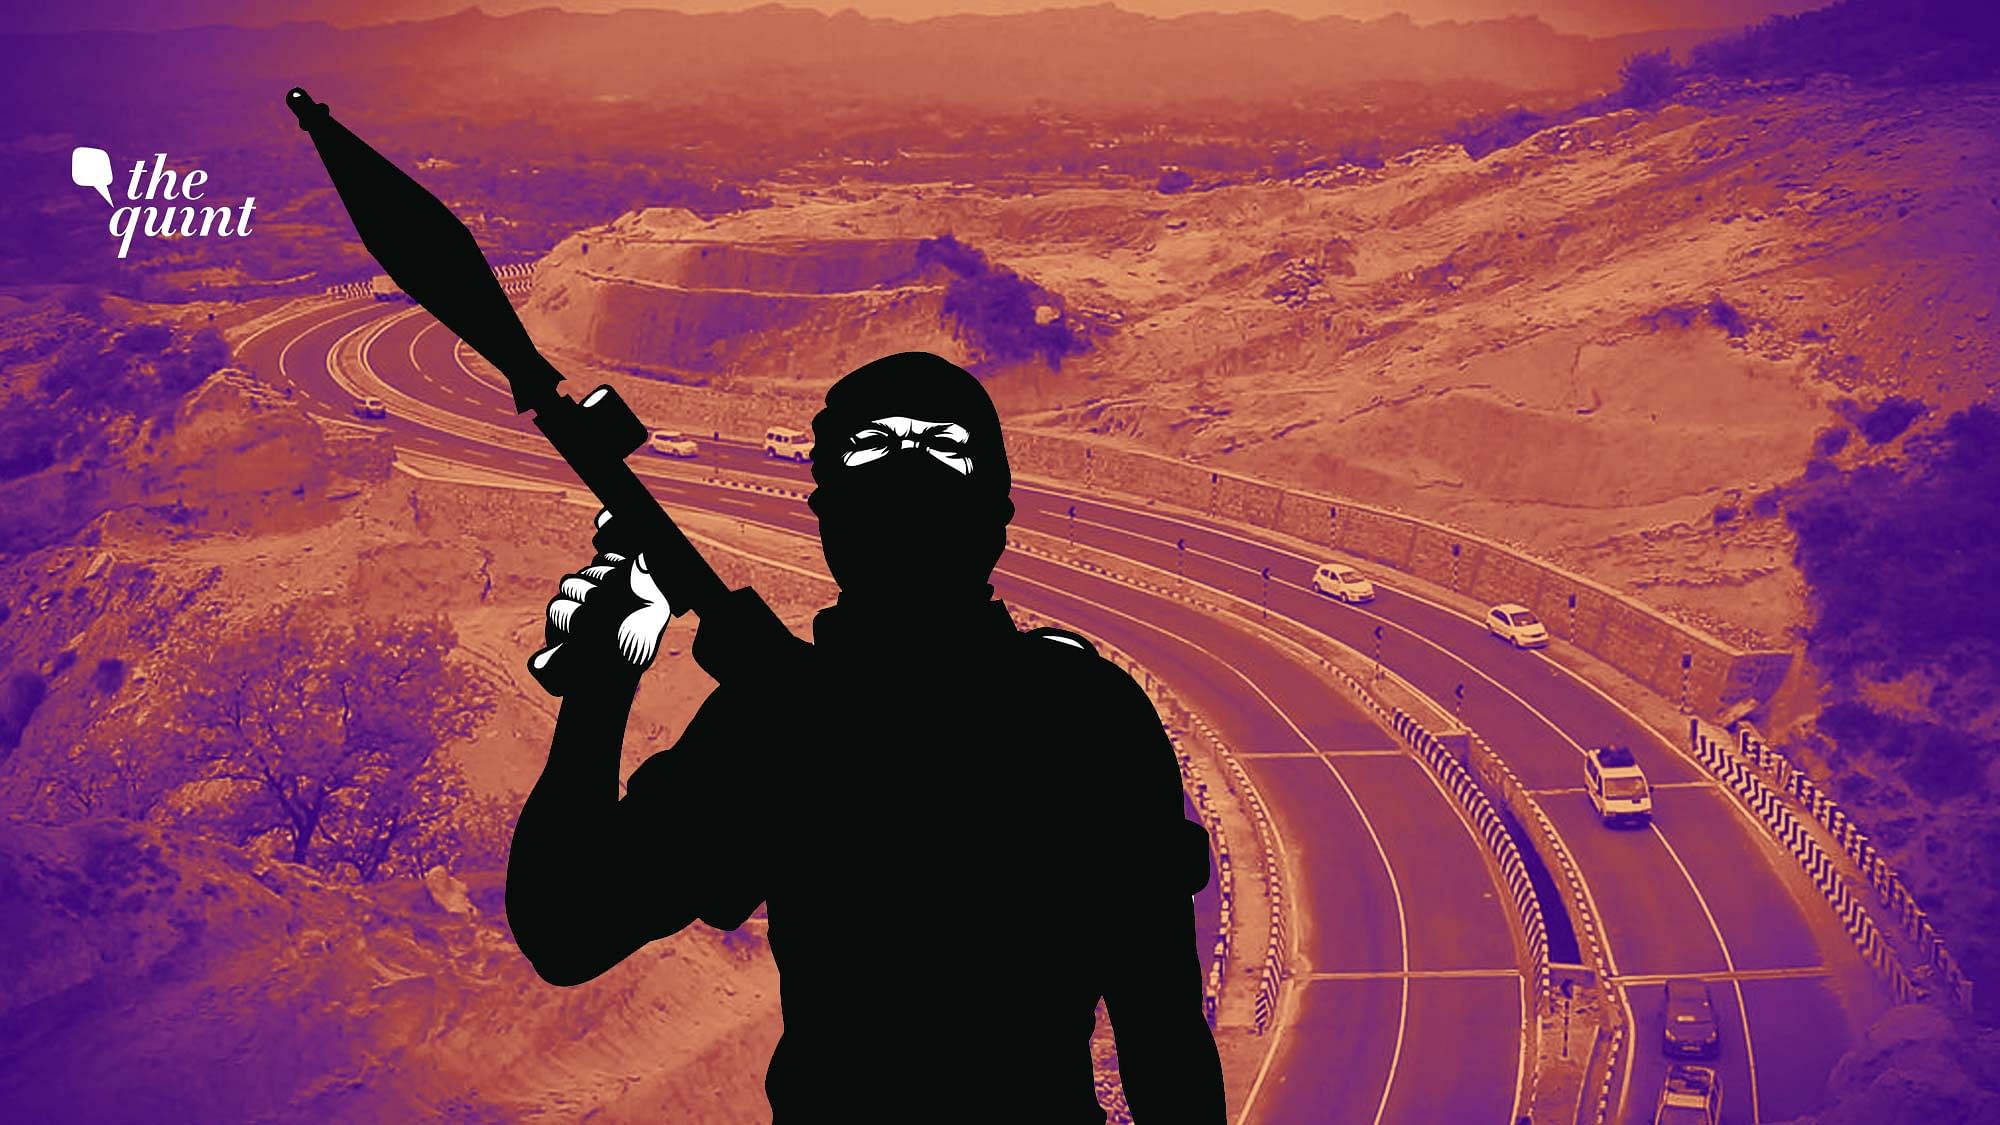 Altered image of Jammu-Srinagar National Highway and an illustration of a militant used for representational purposes.